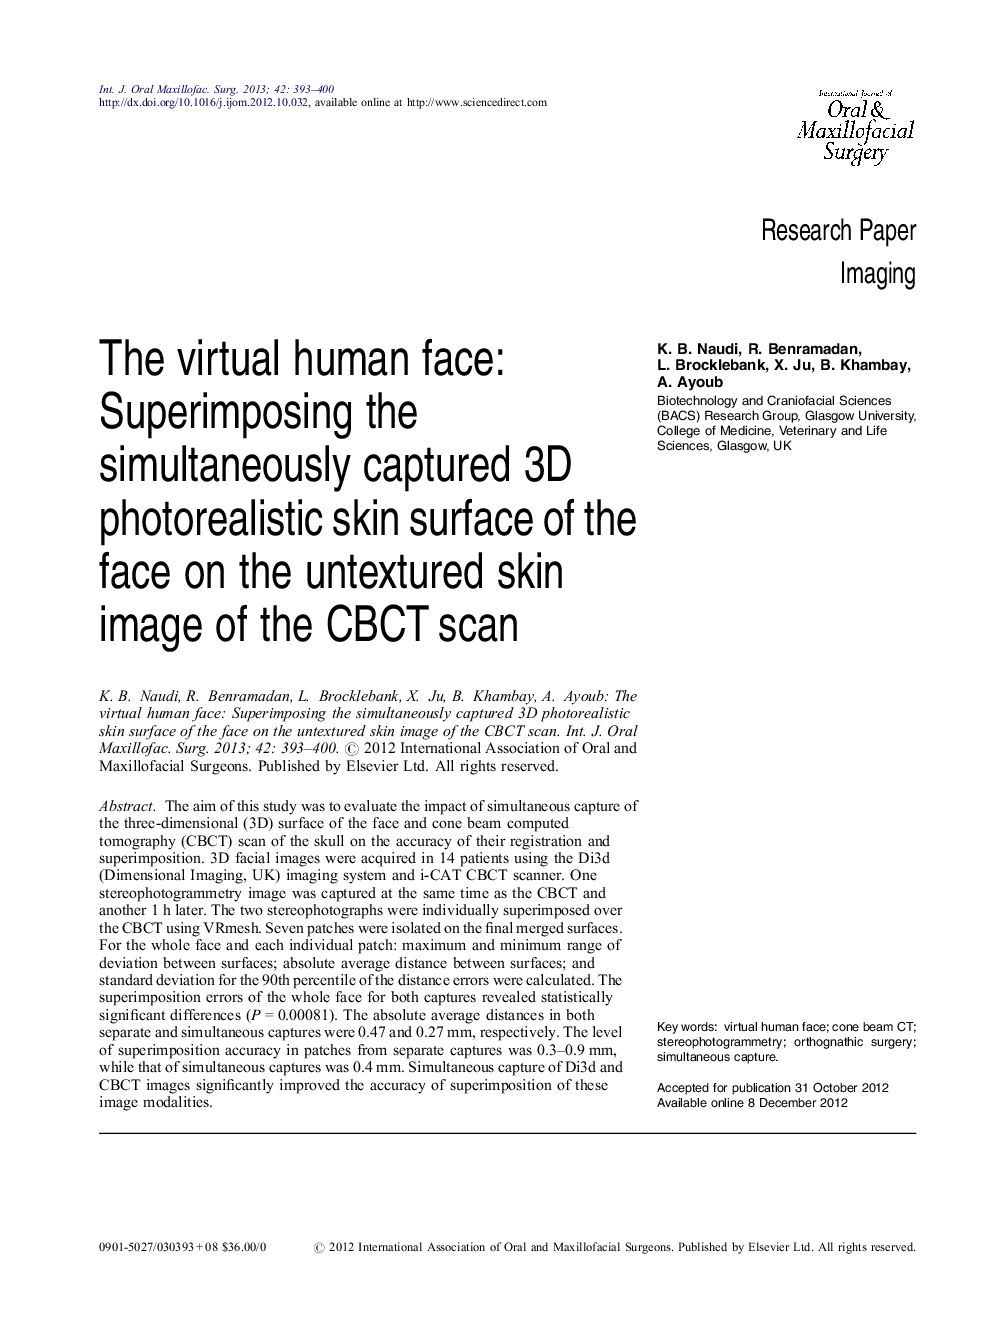 The virtual human face: Superimposing the simultaneously captured 3D photorealistic skin surface of the face on the untextured skin image of the CBCT scan